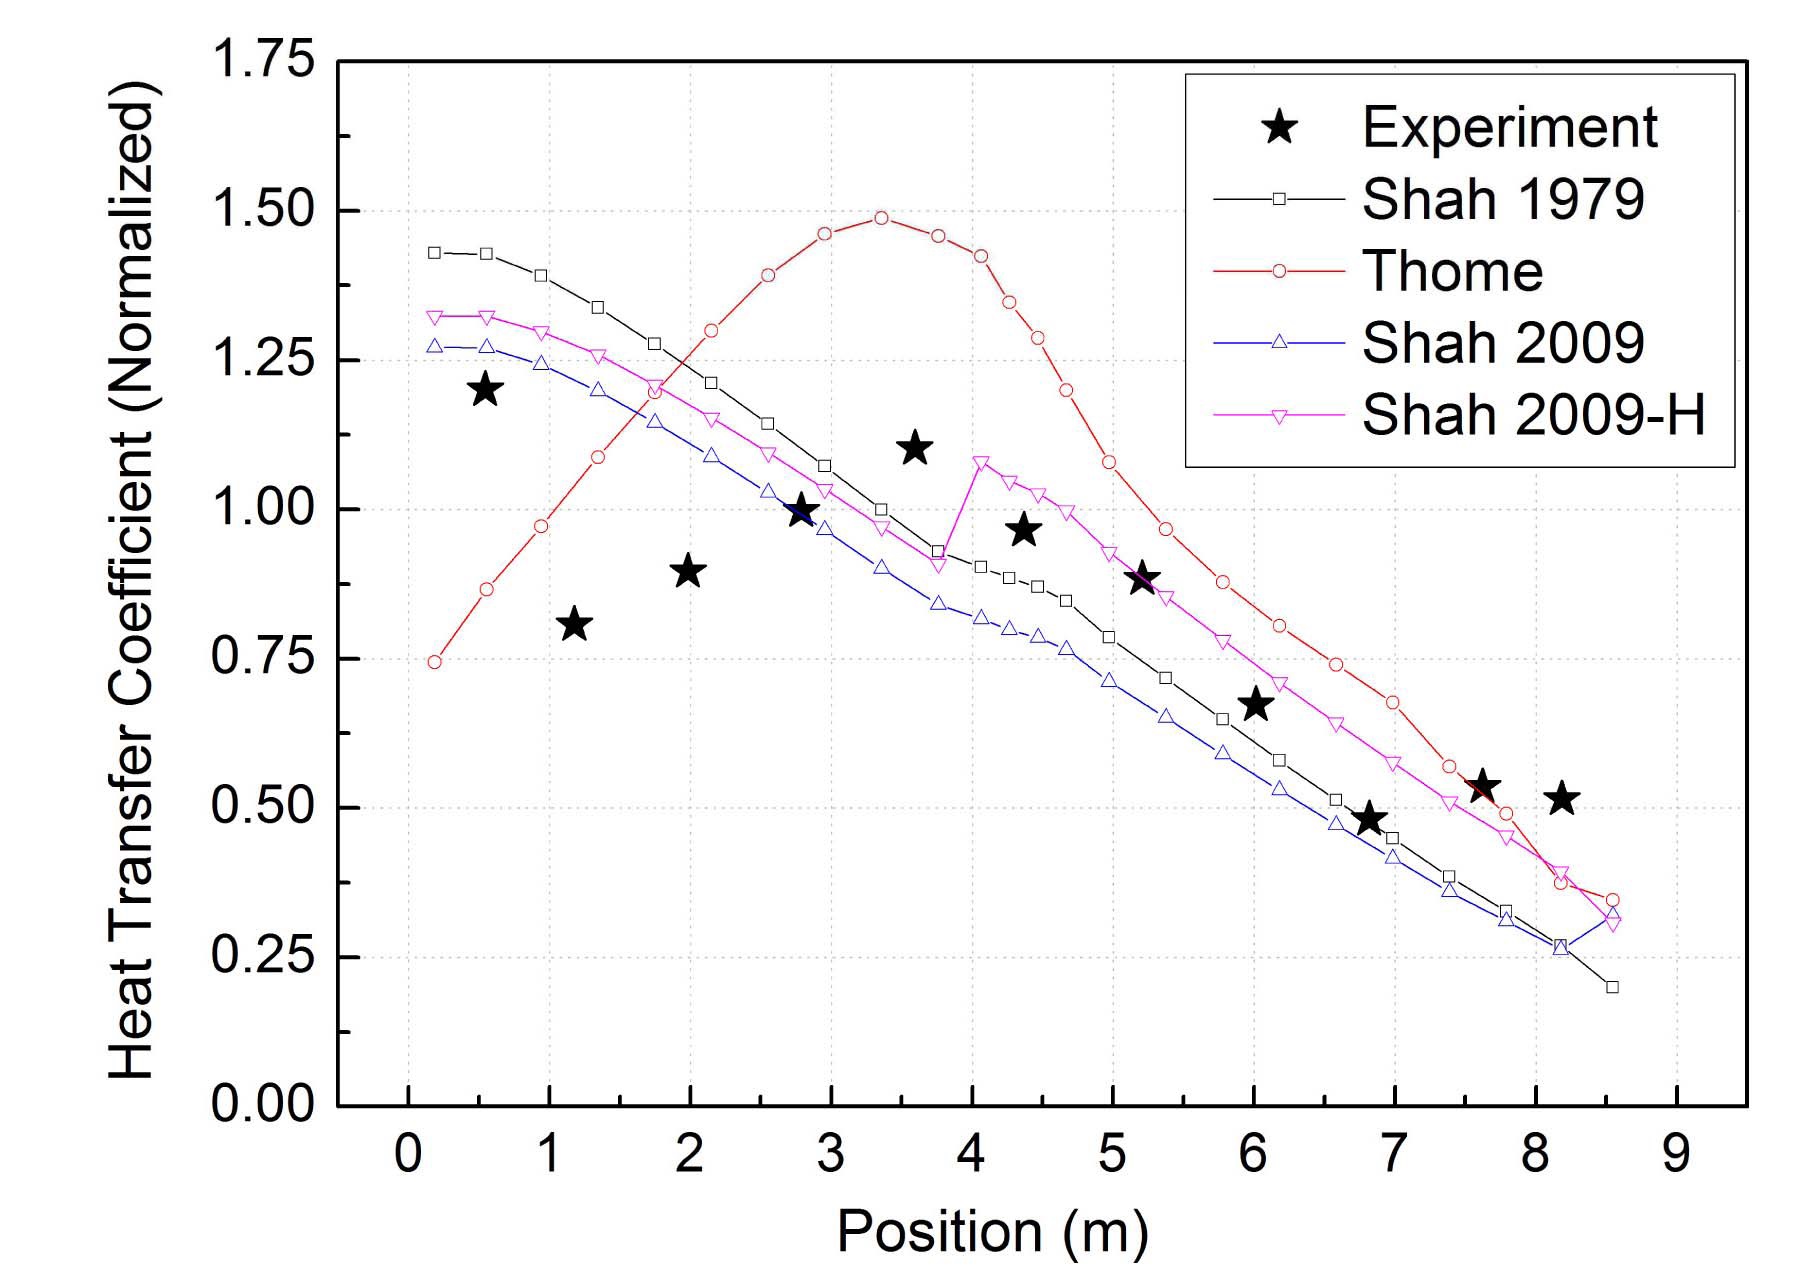 Condensation Heat Transfer Coefficient Inside the
PCHX Tube at Quasi-steady State Condition